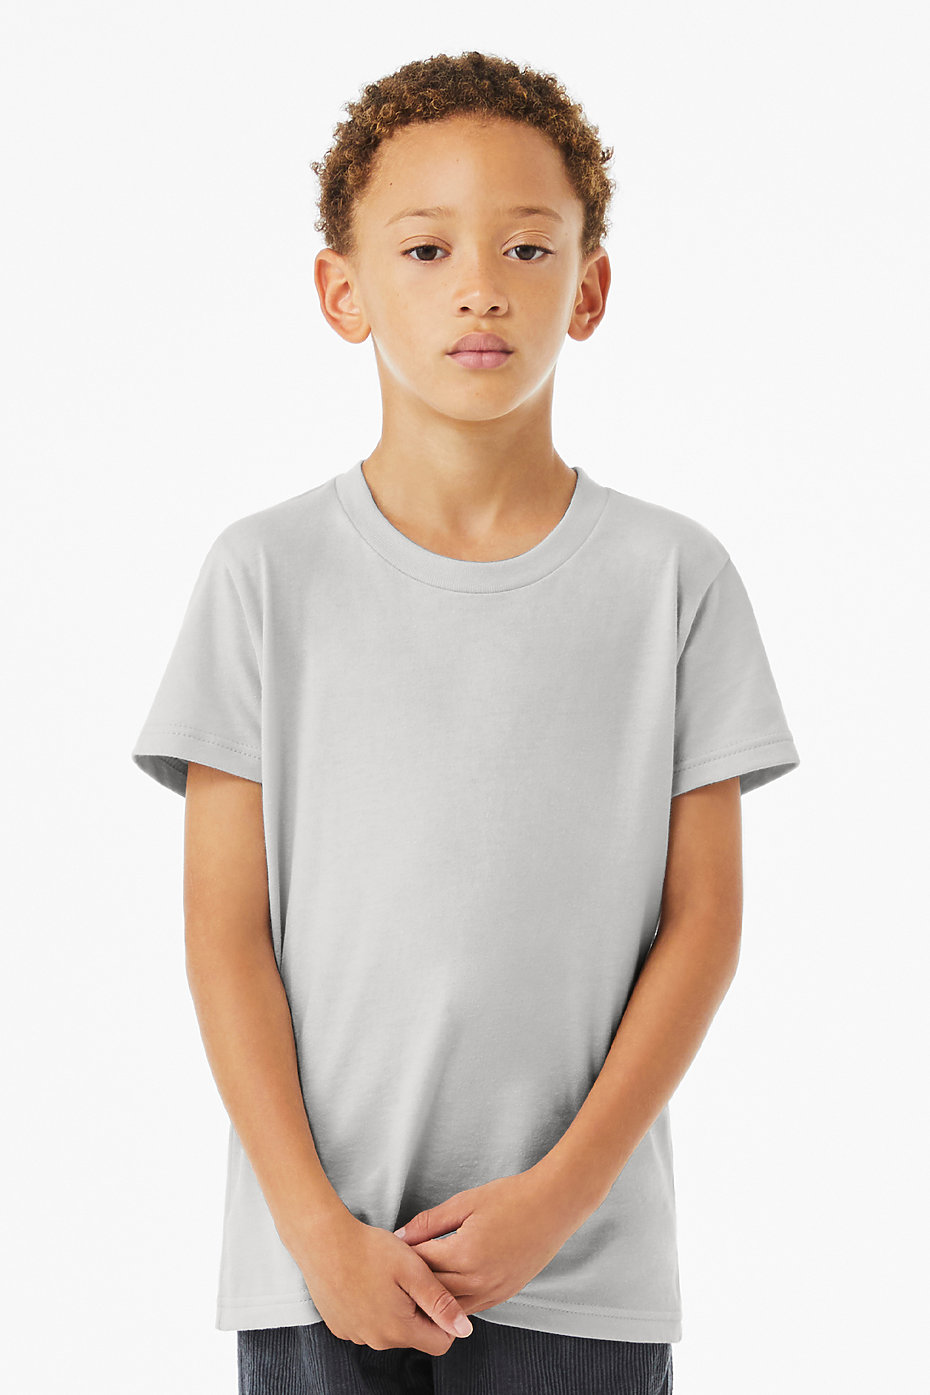 Bella + Canvas T-Shirt | Sleeve ShirtSpace 3001Y Youth Jersey Short 